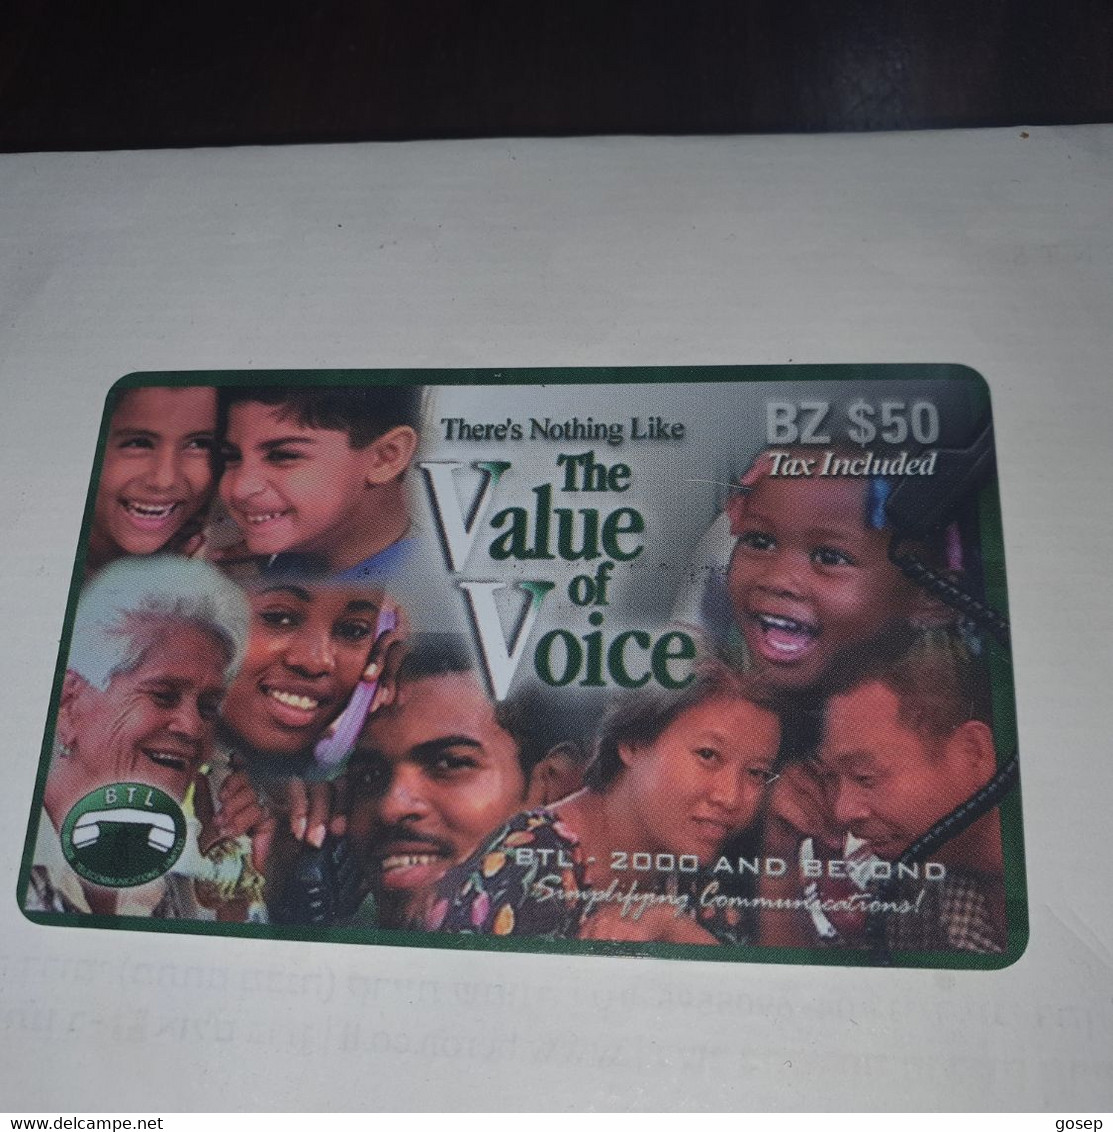 Belize-(BZ-DIG-PRE-?)-(19)-the Value Of Voice-(BZ-$50)-(250-018-1189)-used Card+1card Prepiad/gift Free - Belice